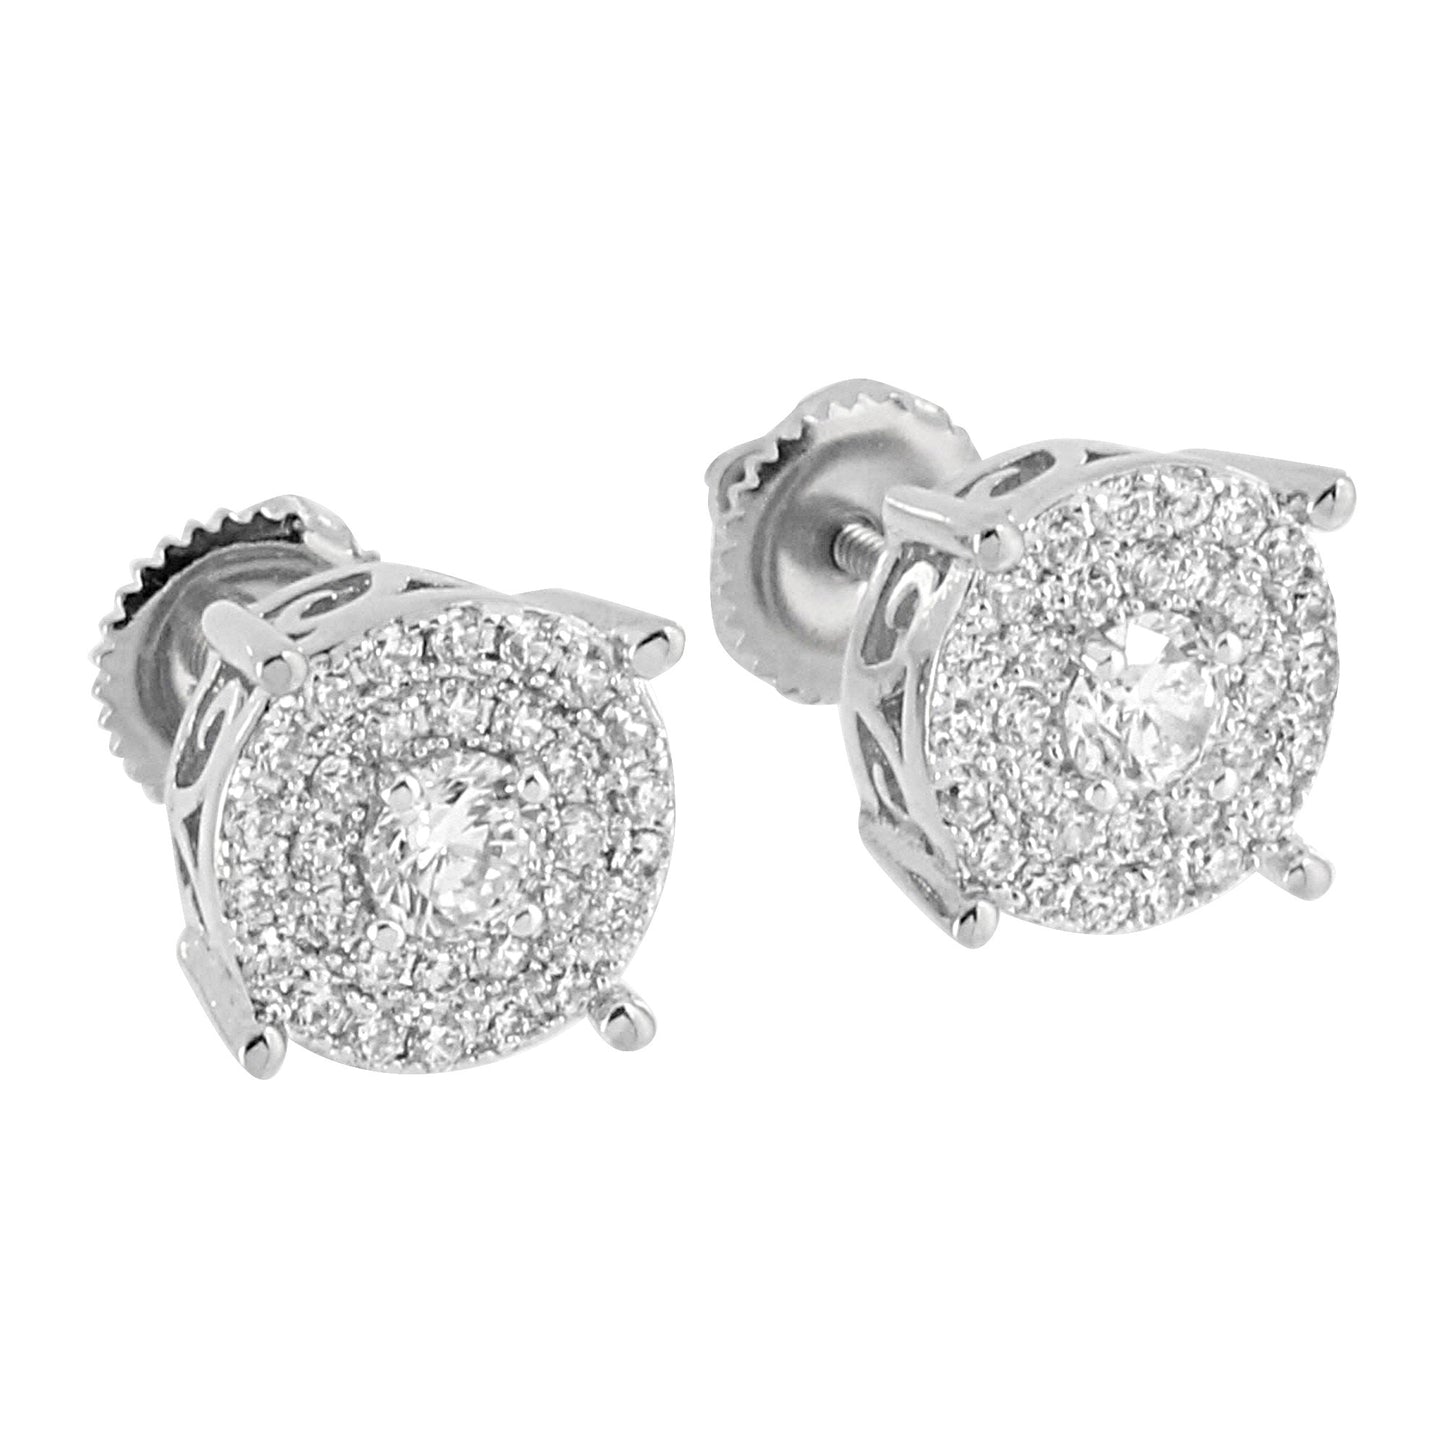 Prong Set Earrings Solitaire Studs Screw Back